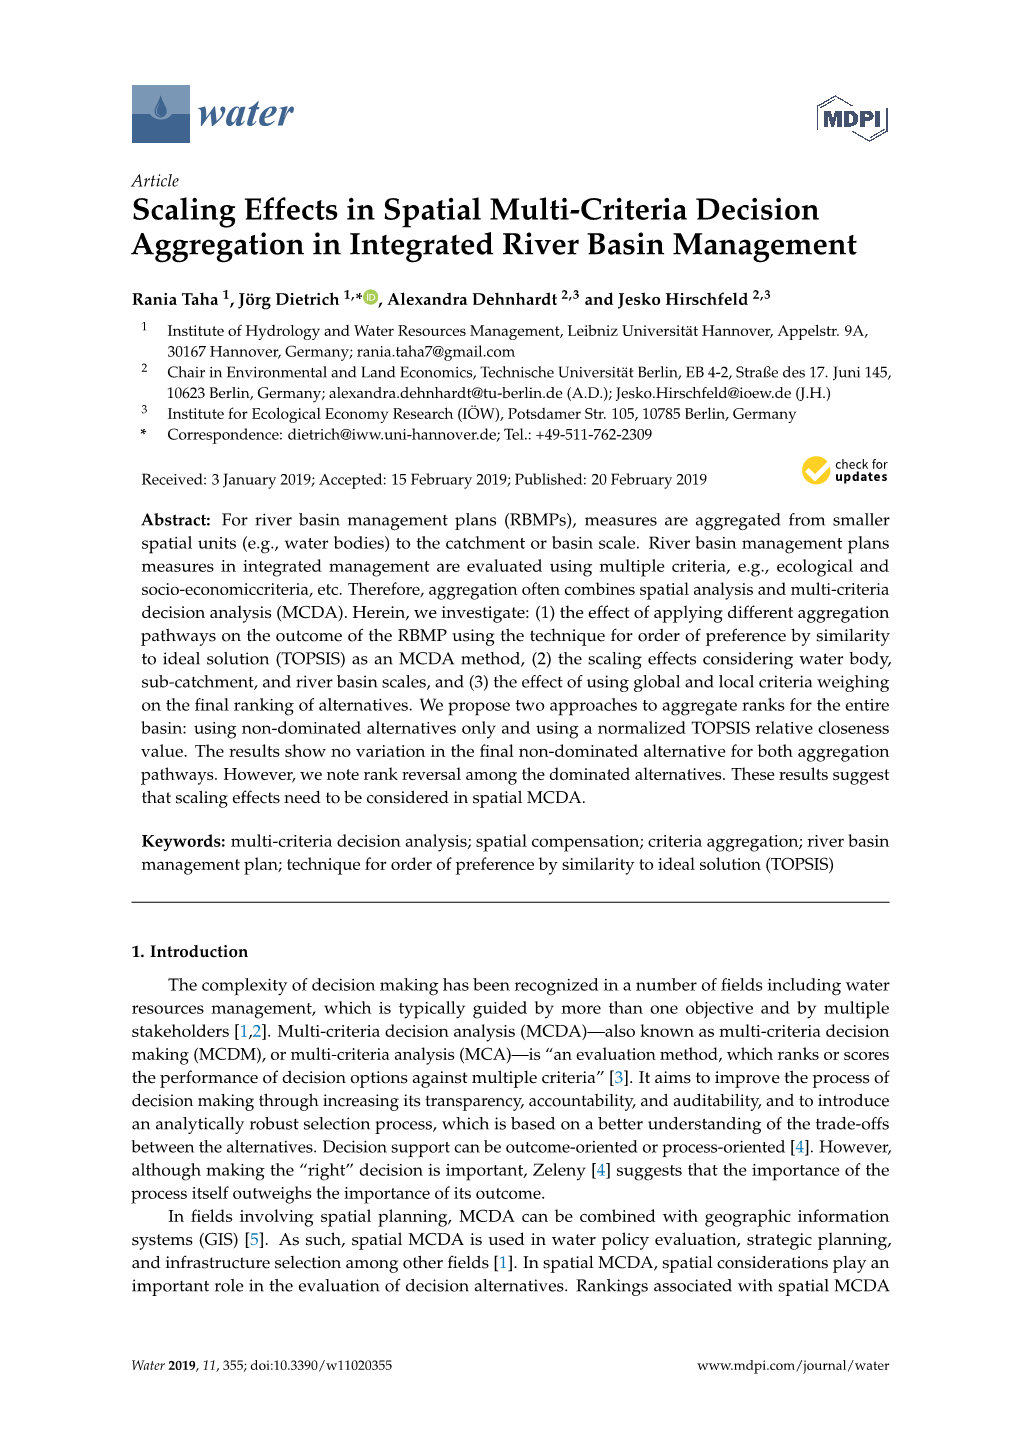 Scaling Effects in Spatial Multi-Criteria Decision Aggregation in Integrated River Basin Management